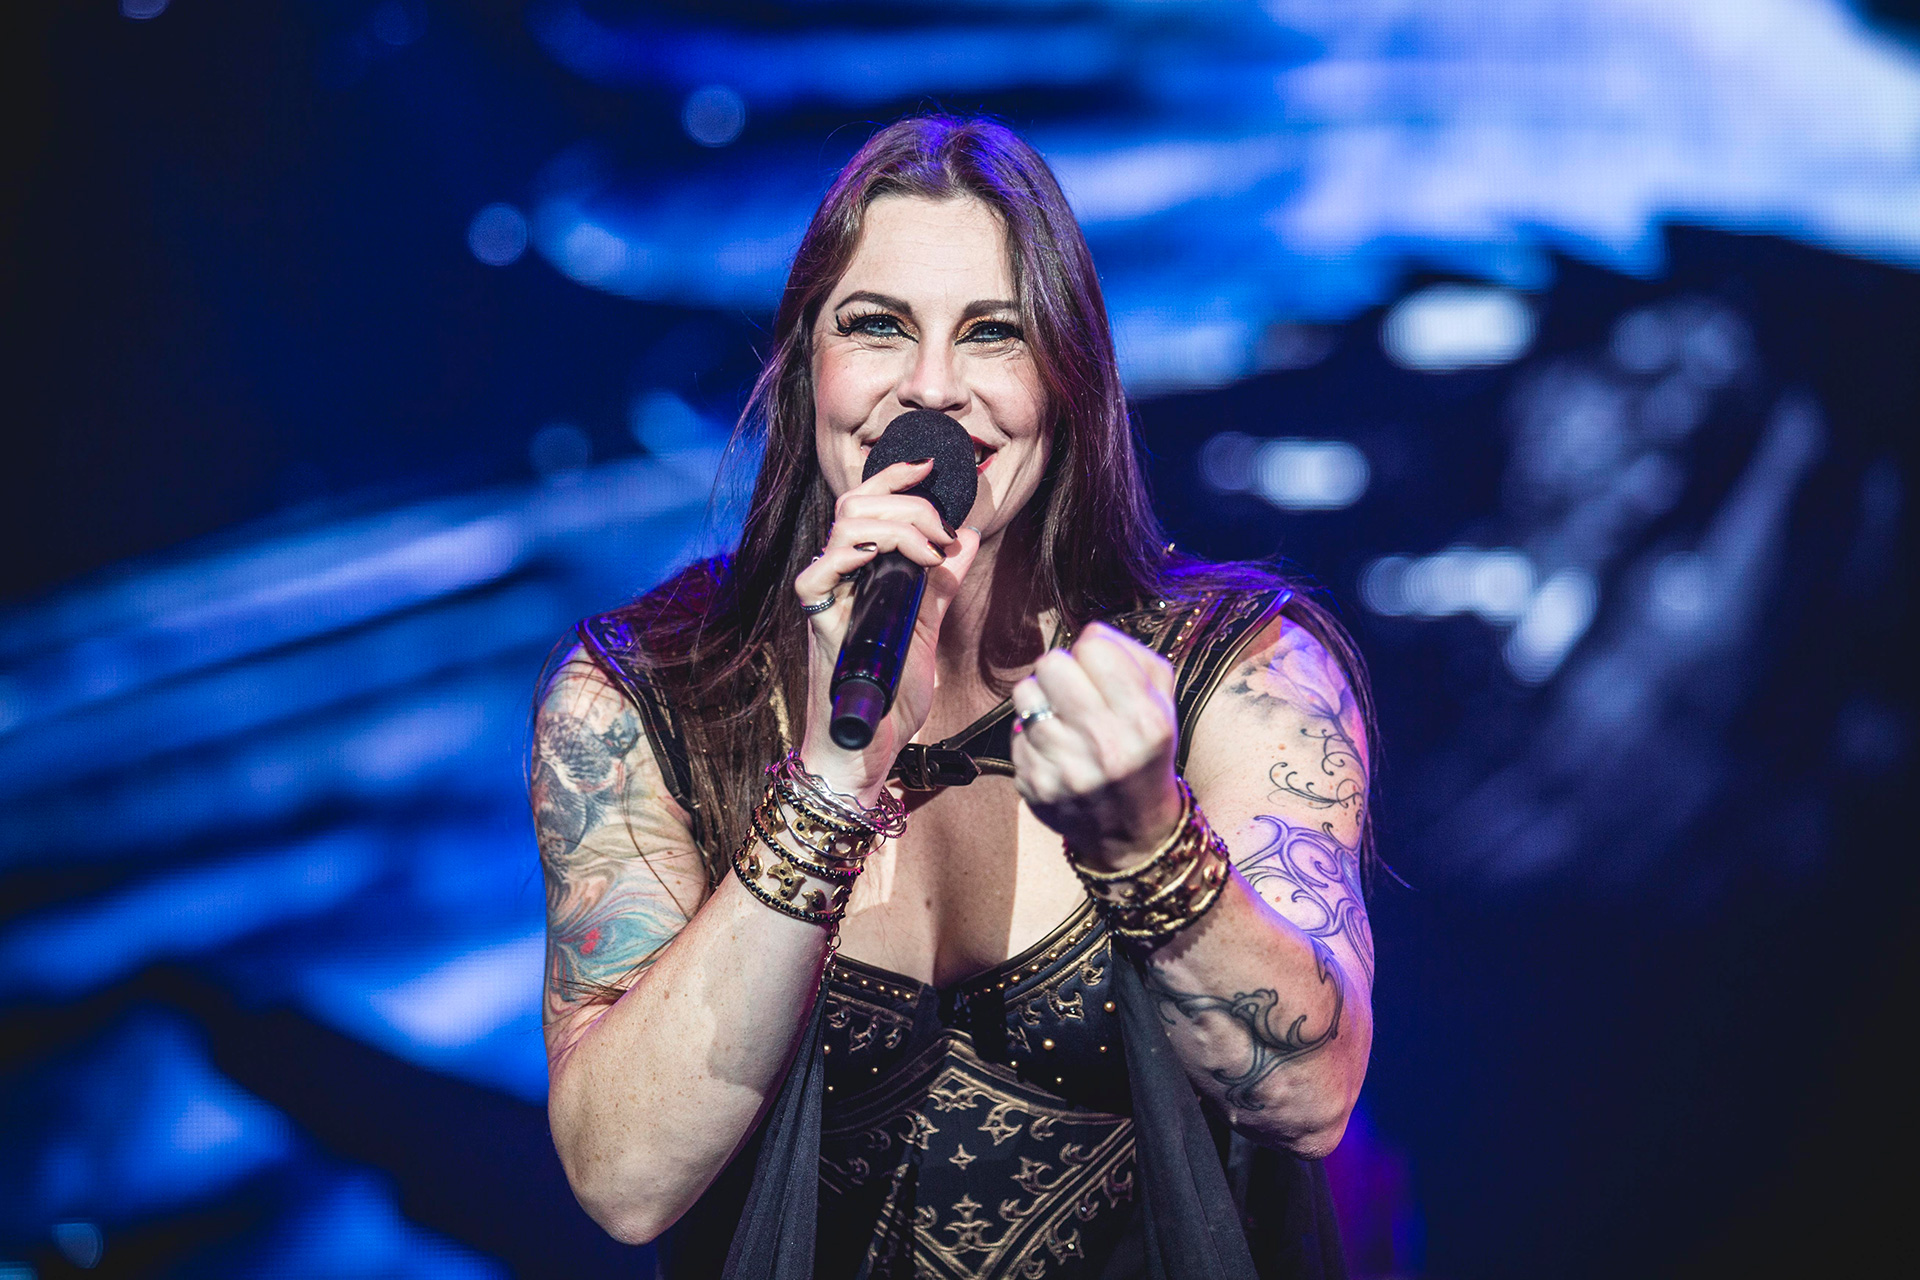 Floor Jansen - Have you seen the artwork and name of our... | Facebook